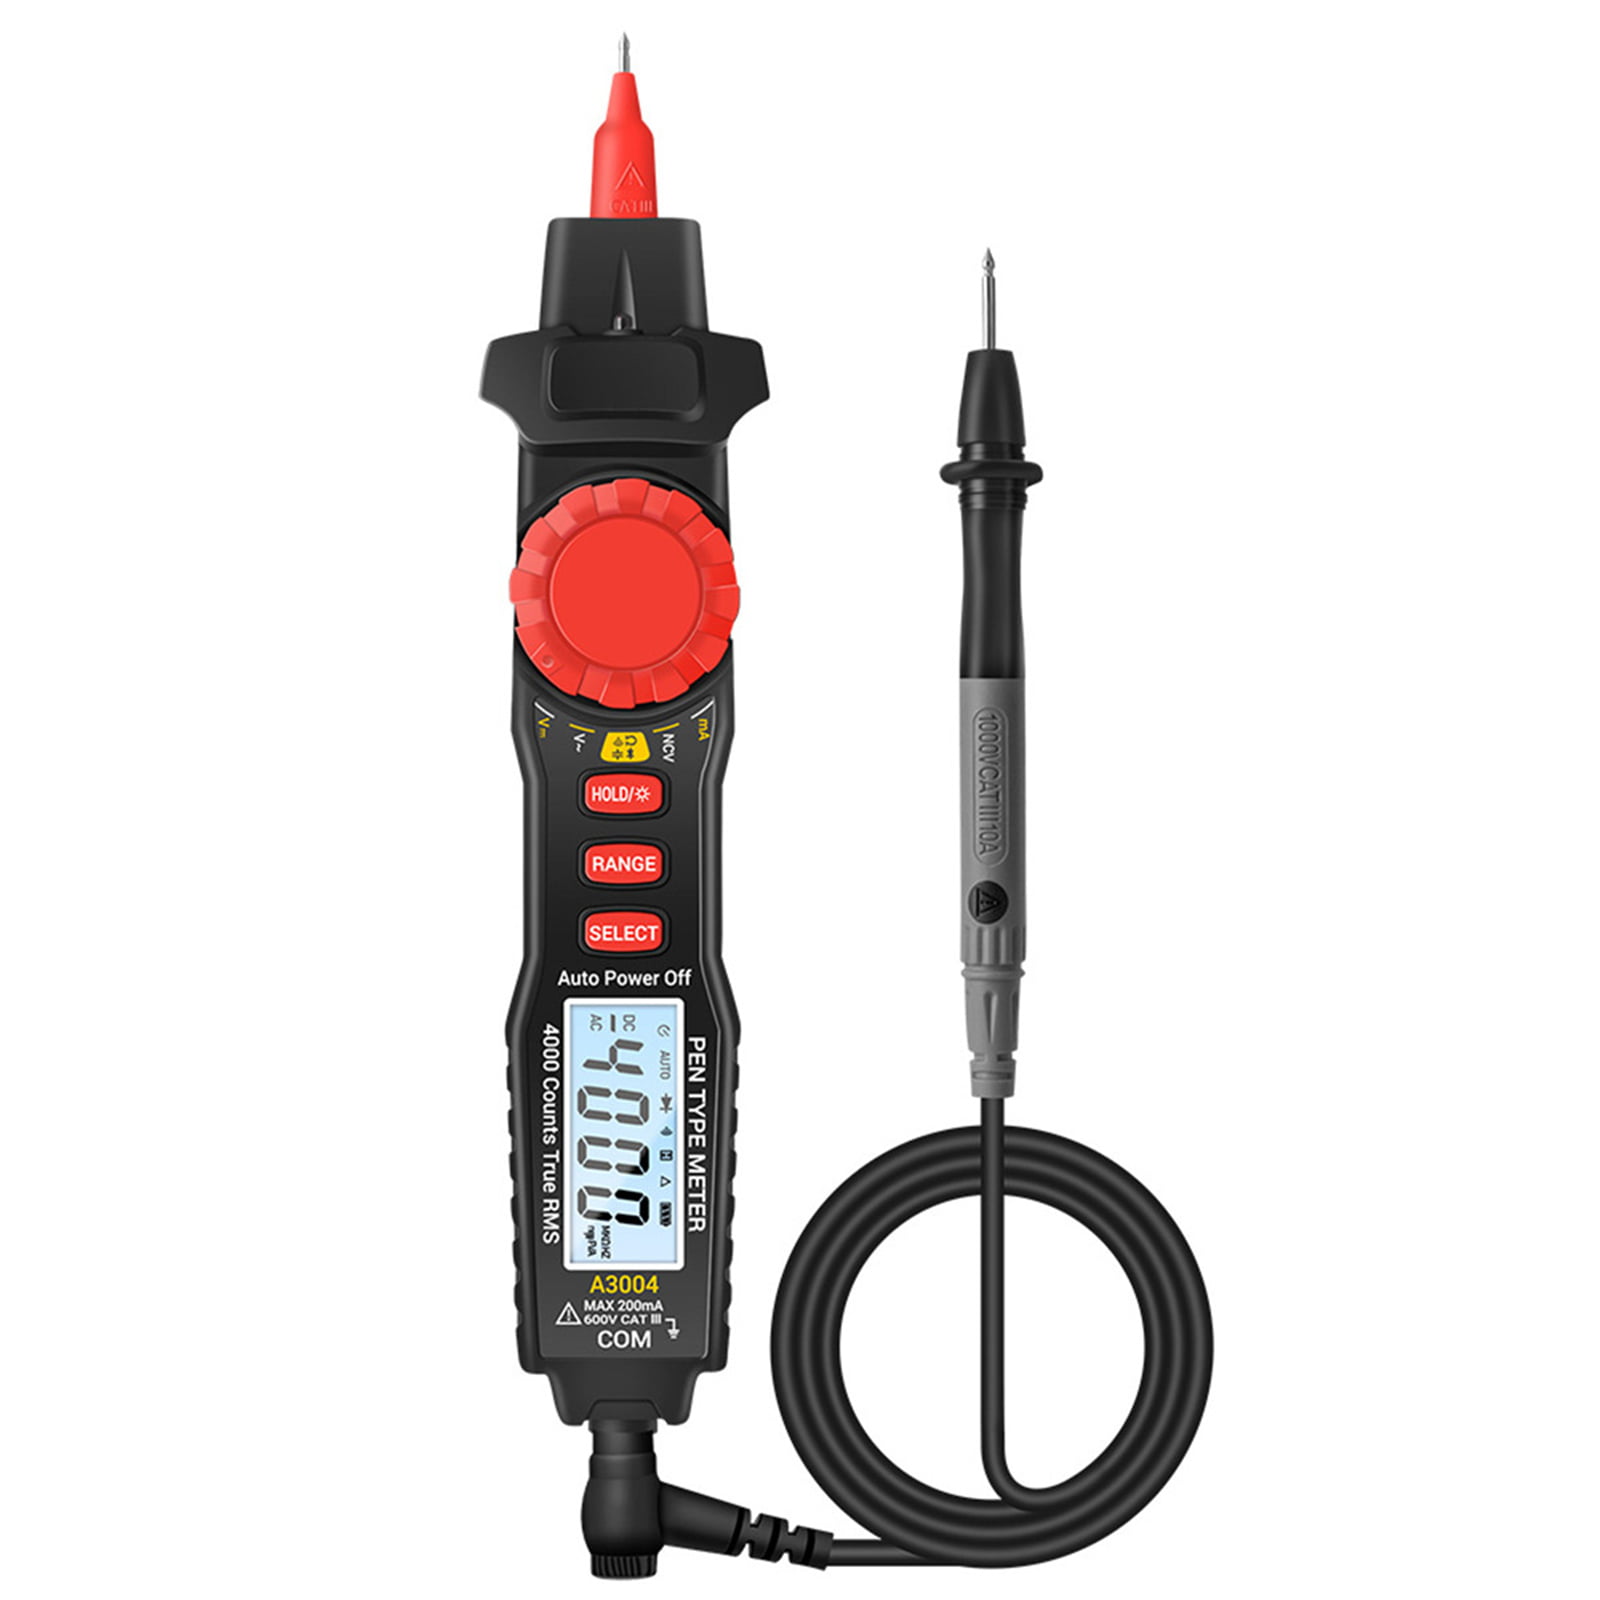 AC DC Voltage Current Resistance Tester Probe Tester Handheld Electrical Multitester Auto Range Pen Type for Data Hold for Electrician